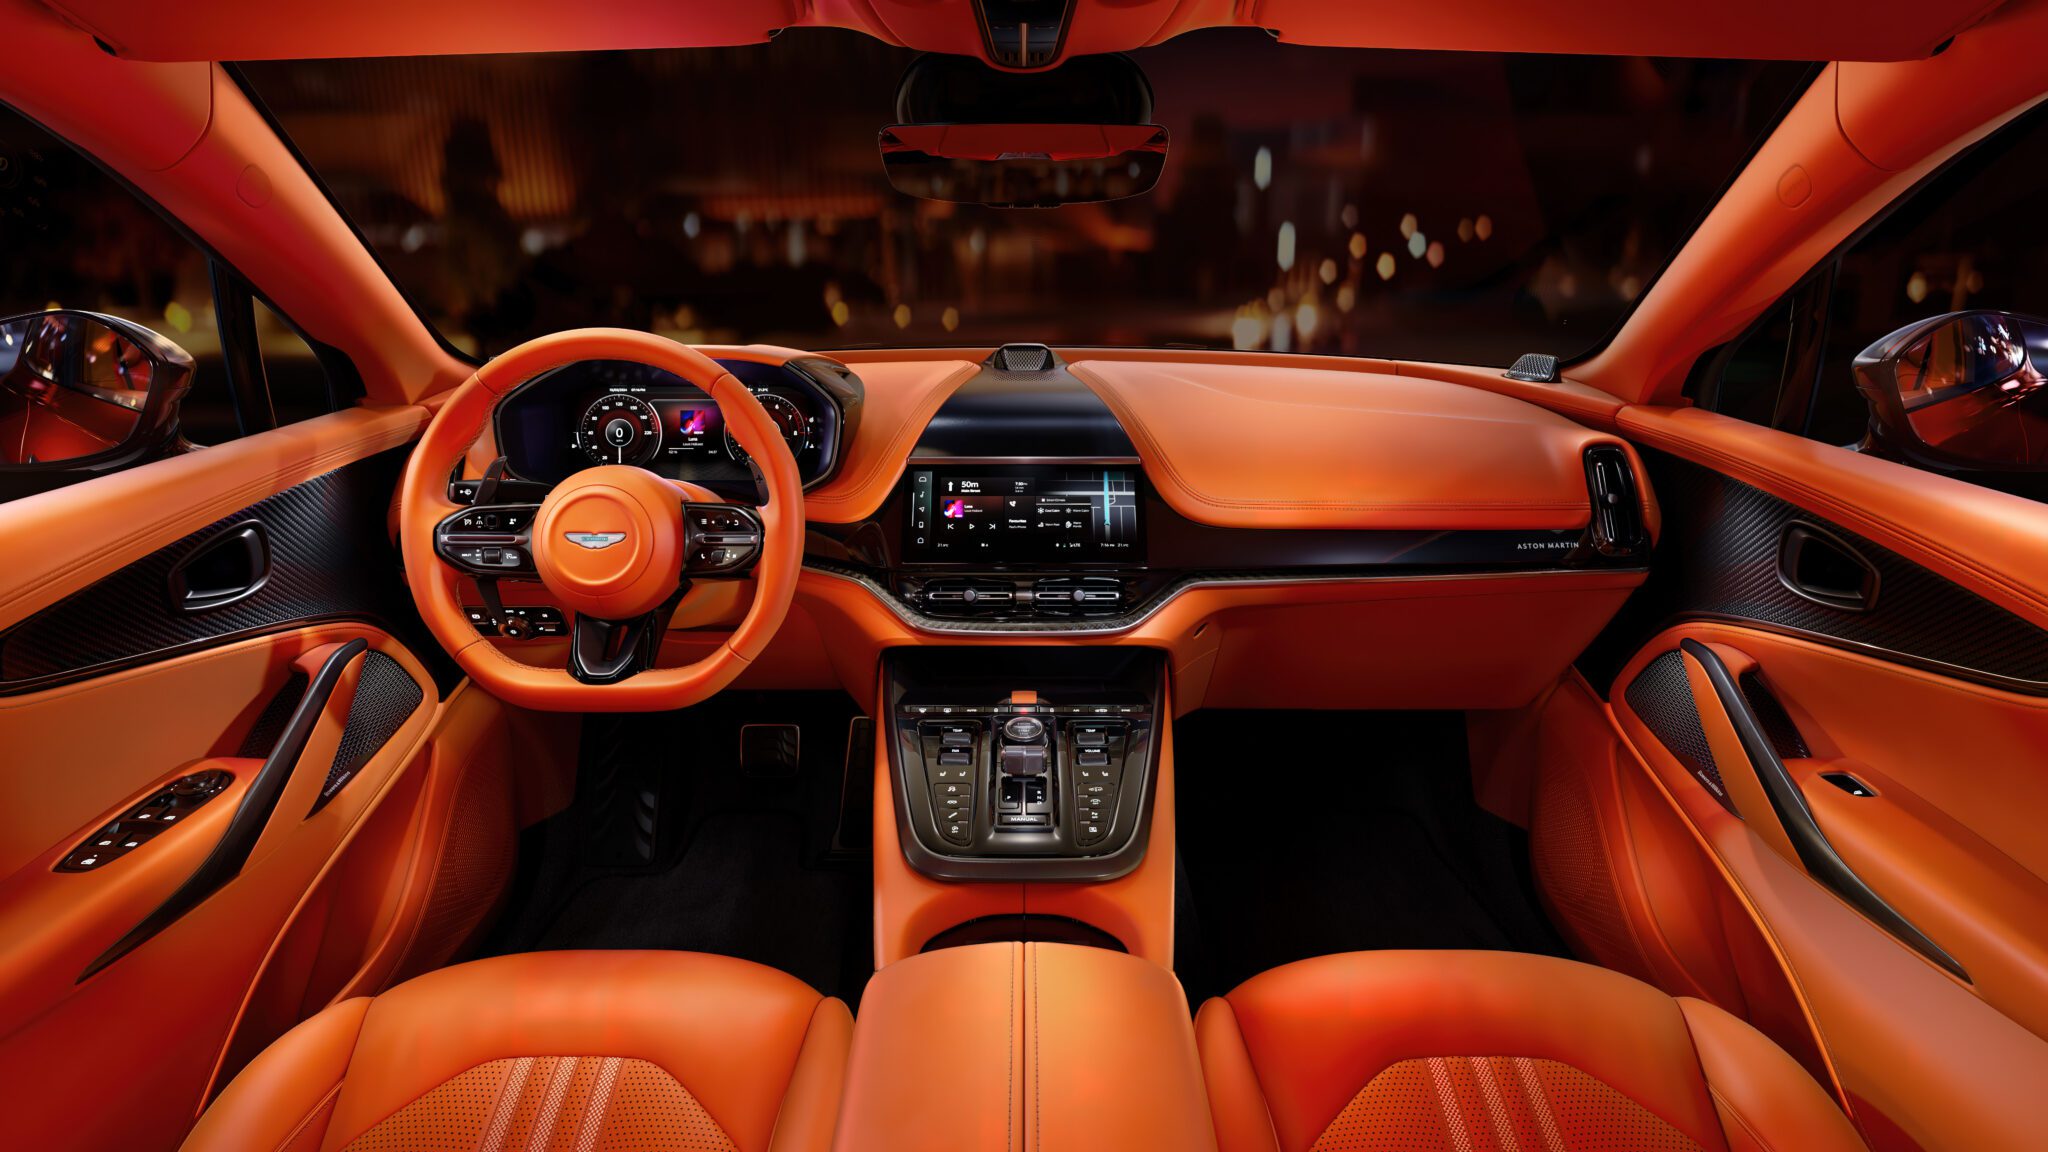 An image of a car's orange leather interior.